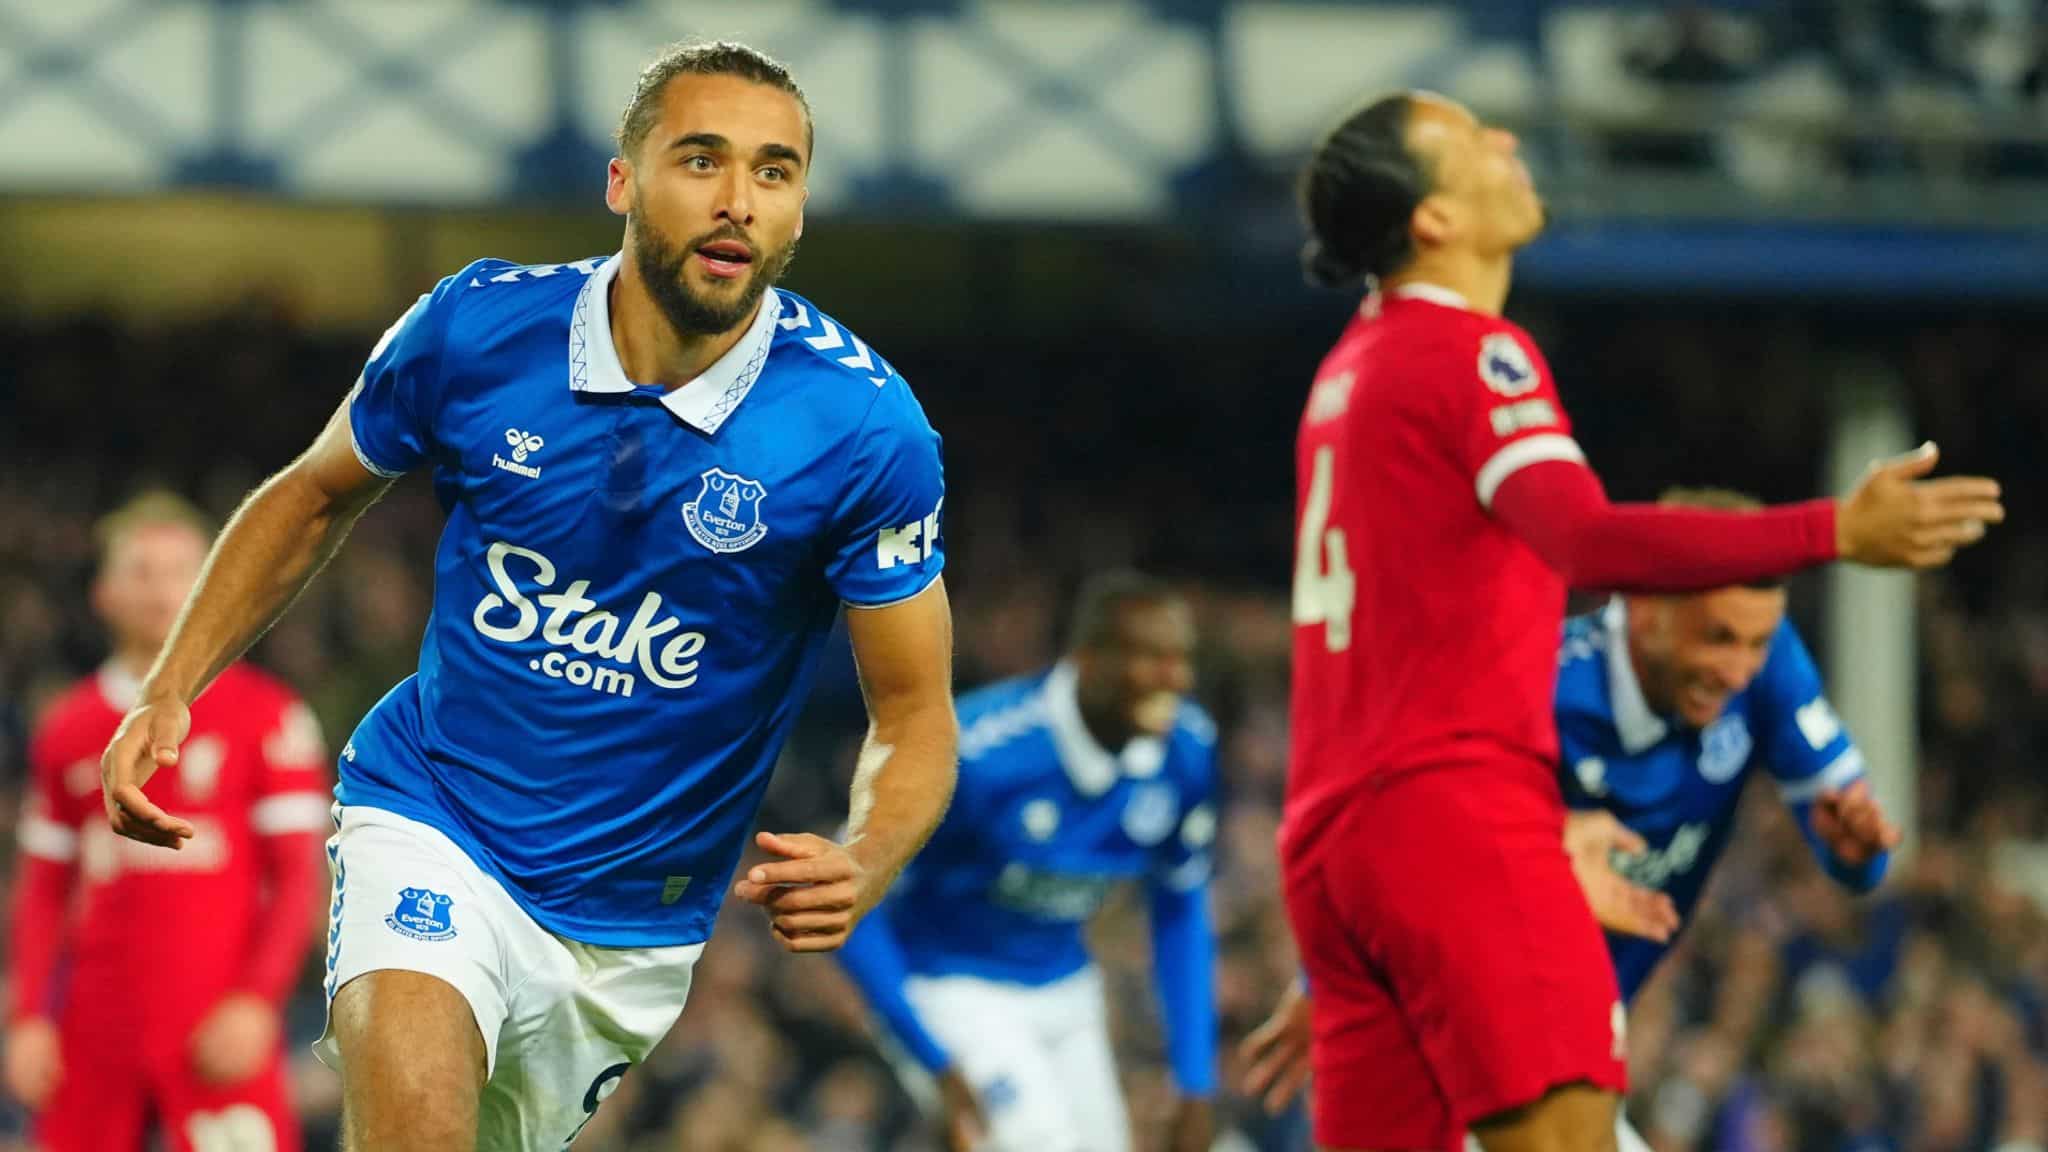 Liverpool's EPL Title Hope Suffers Setback After Big Loss Against Everton